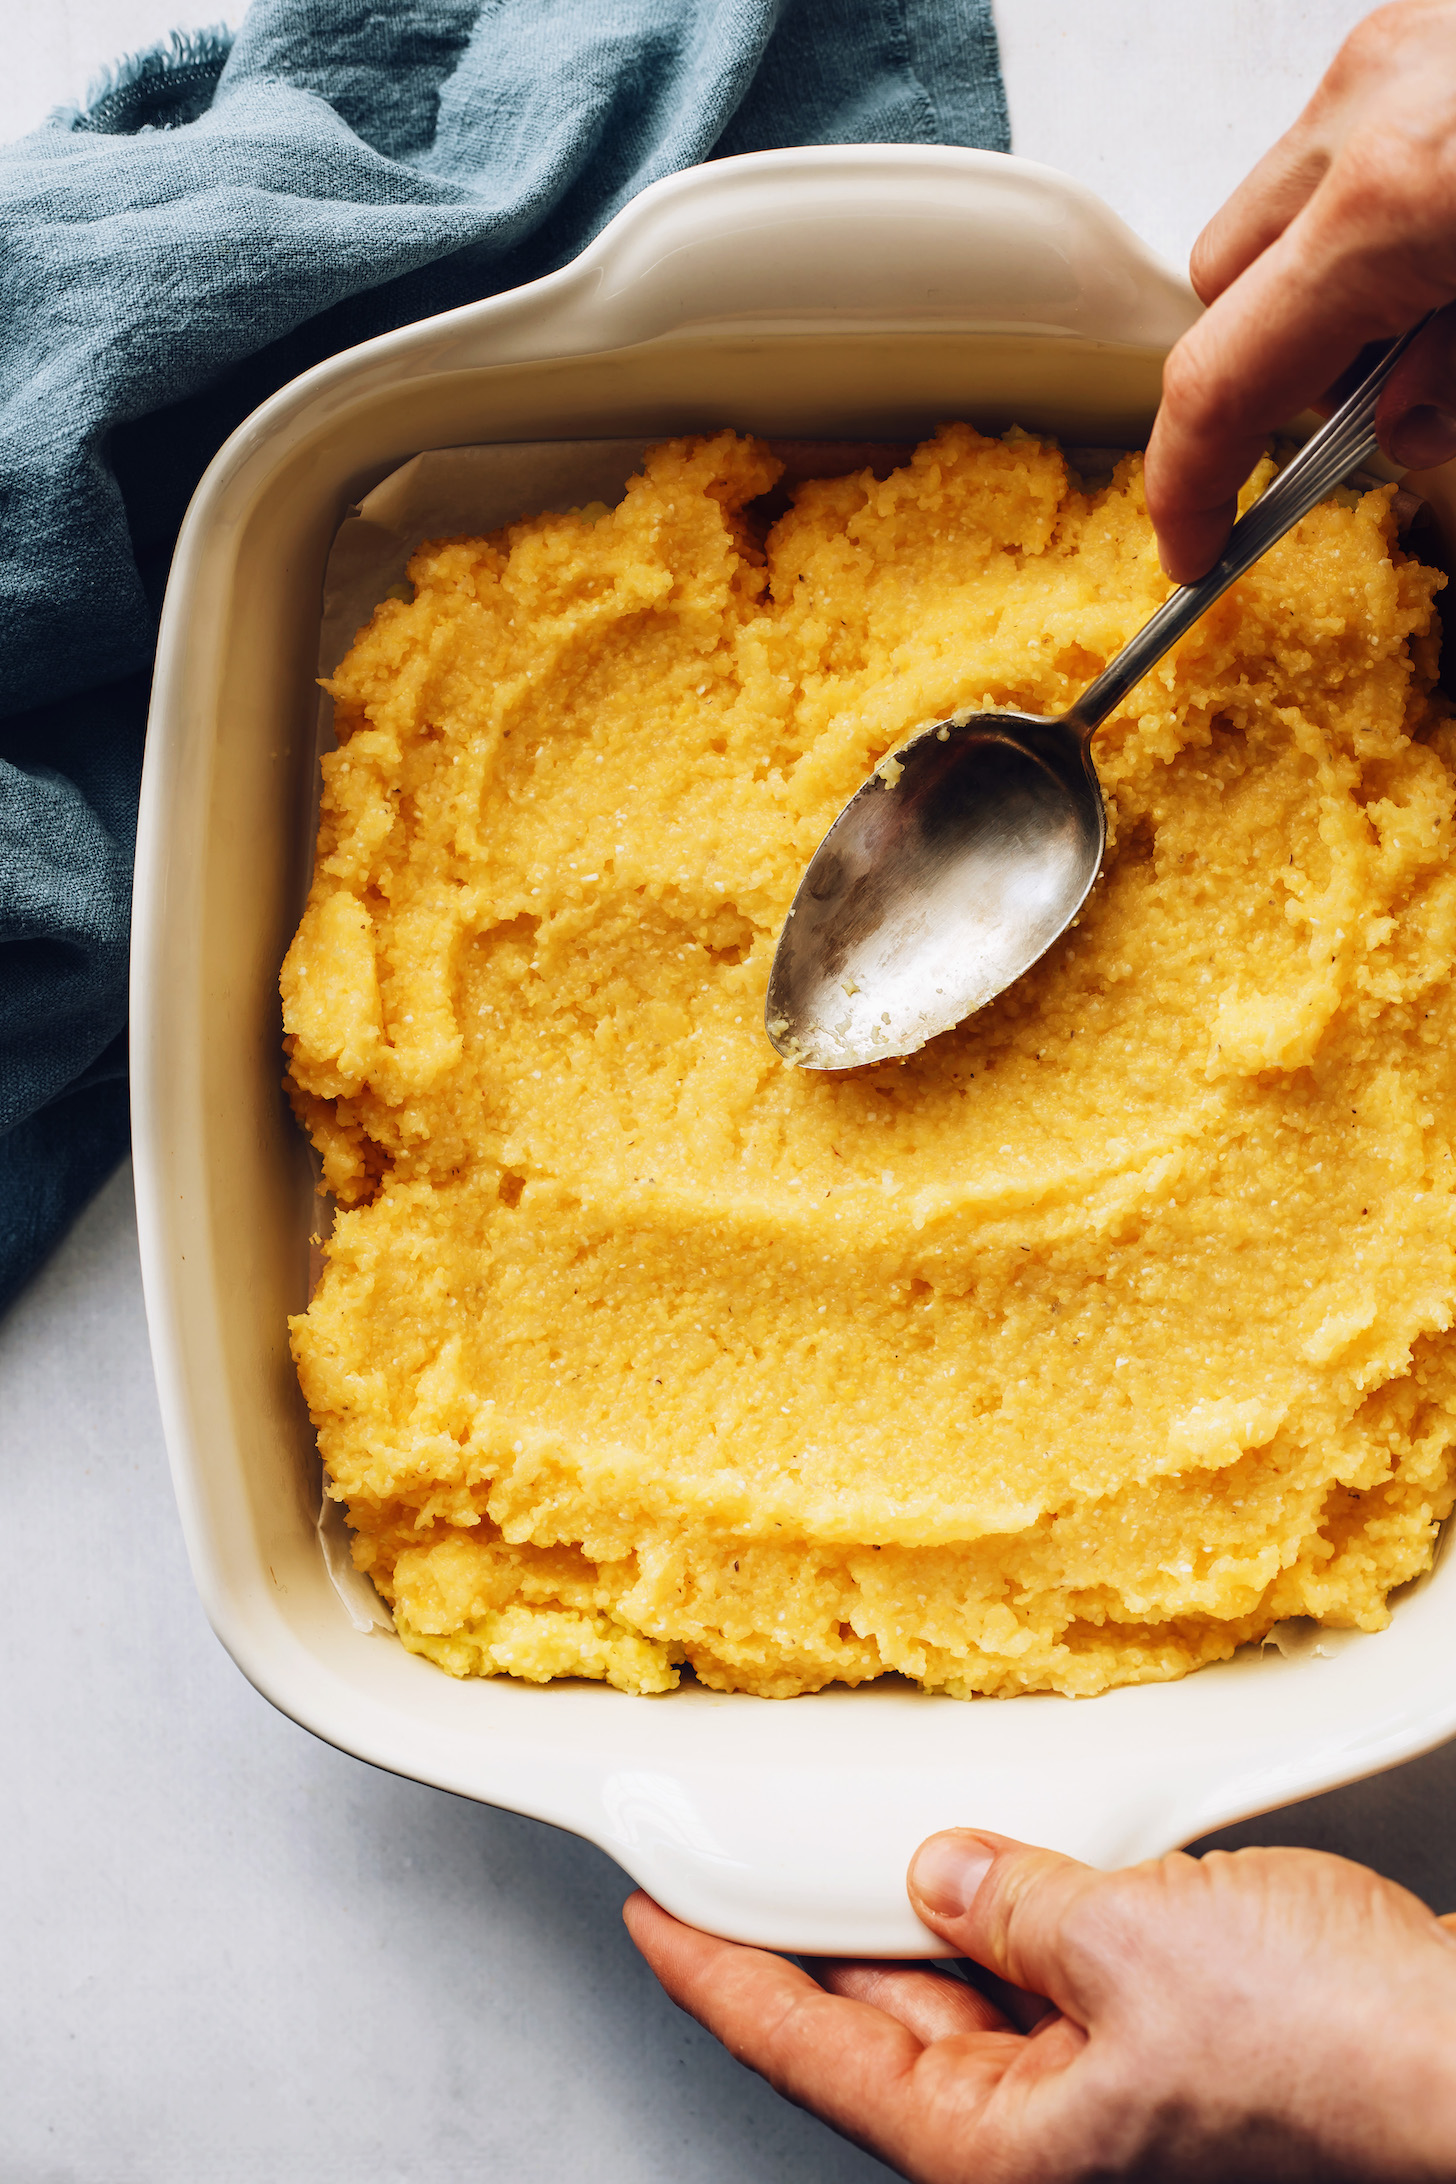 Using a spoon to smooth over the top of a pan of polenta